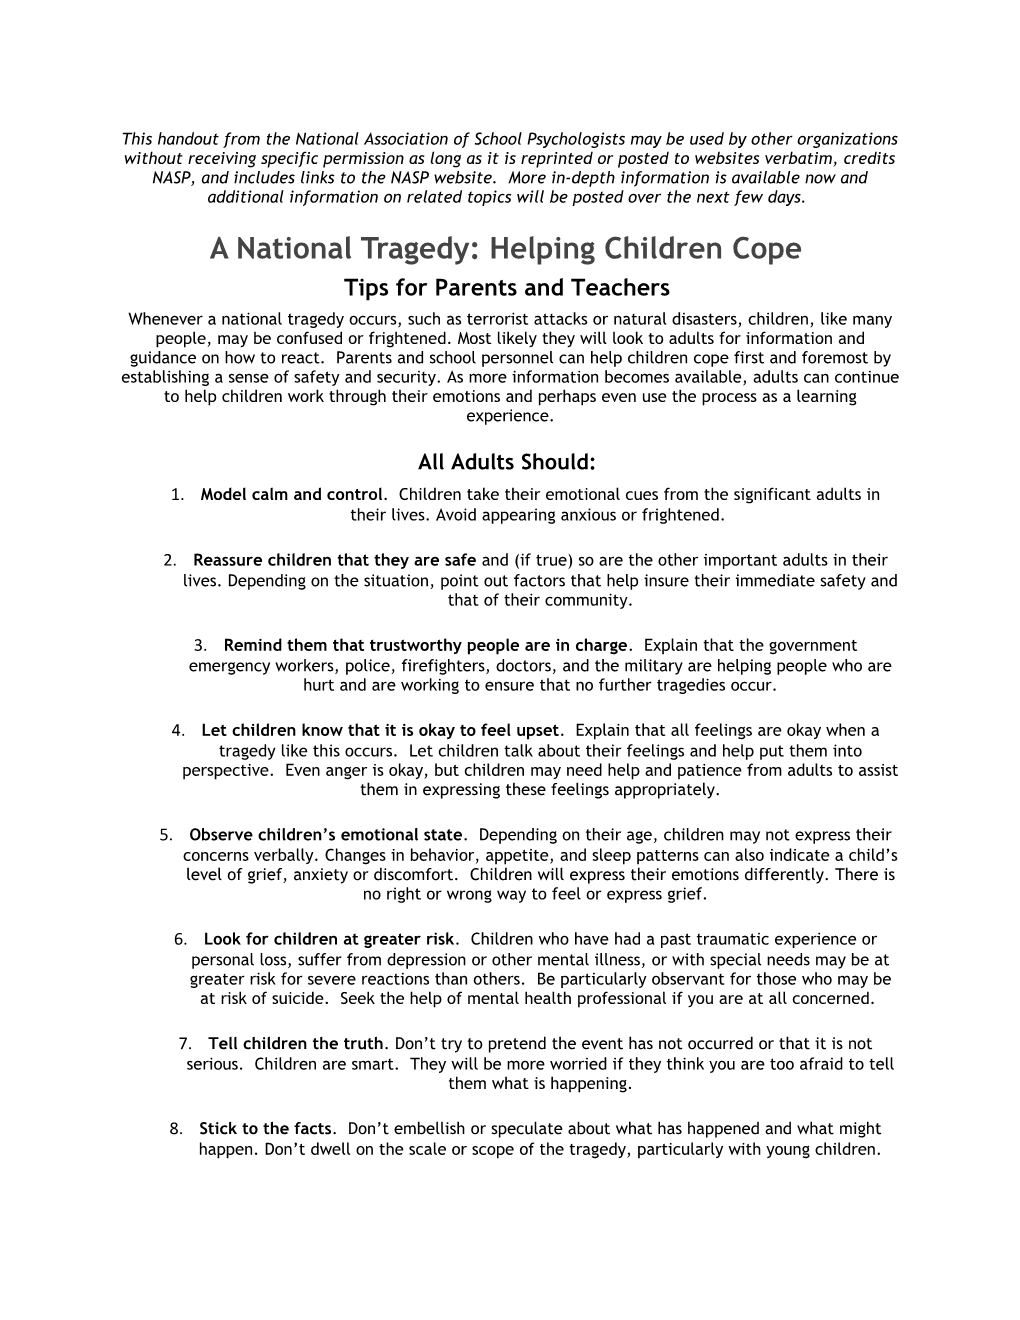 A National Tragedy: Helping Children Cope